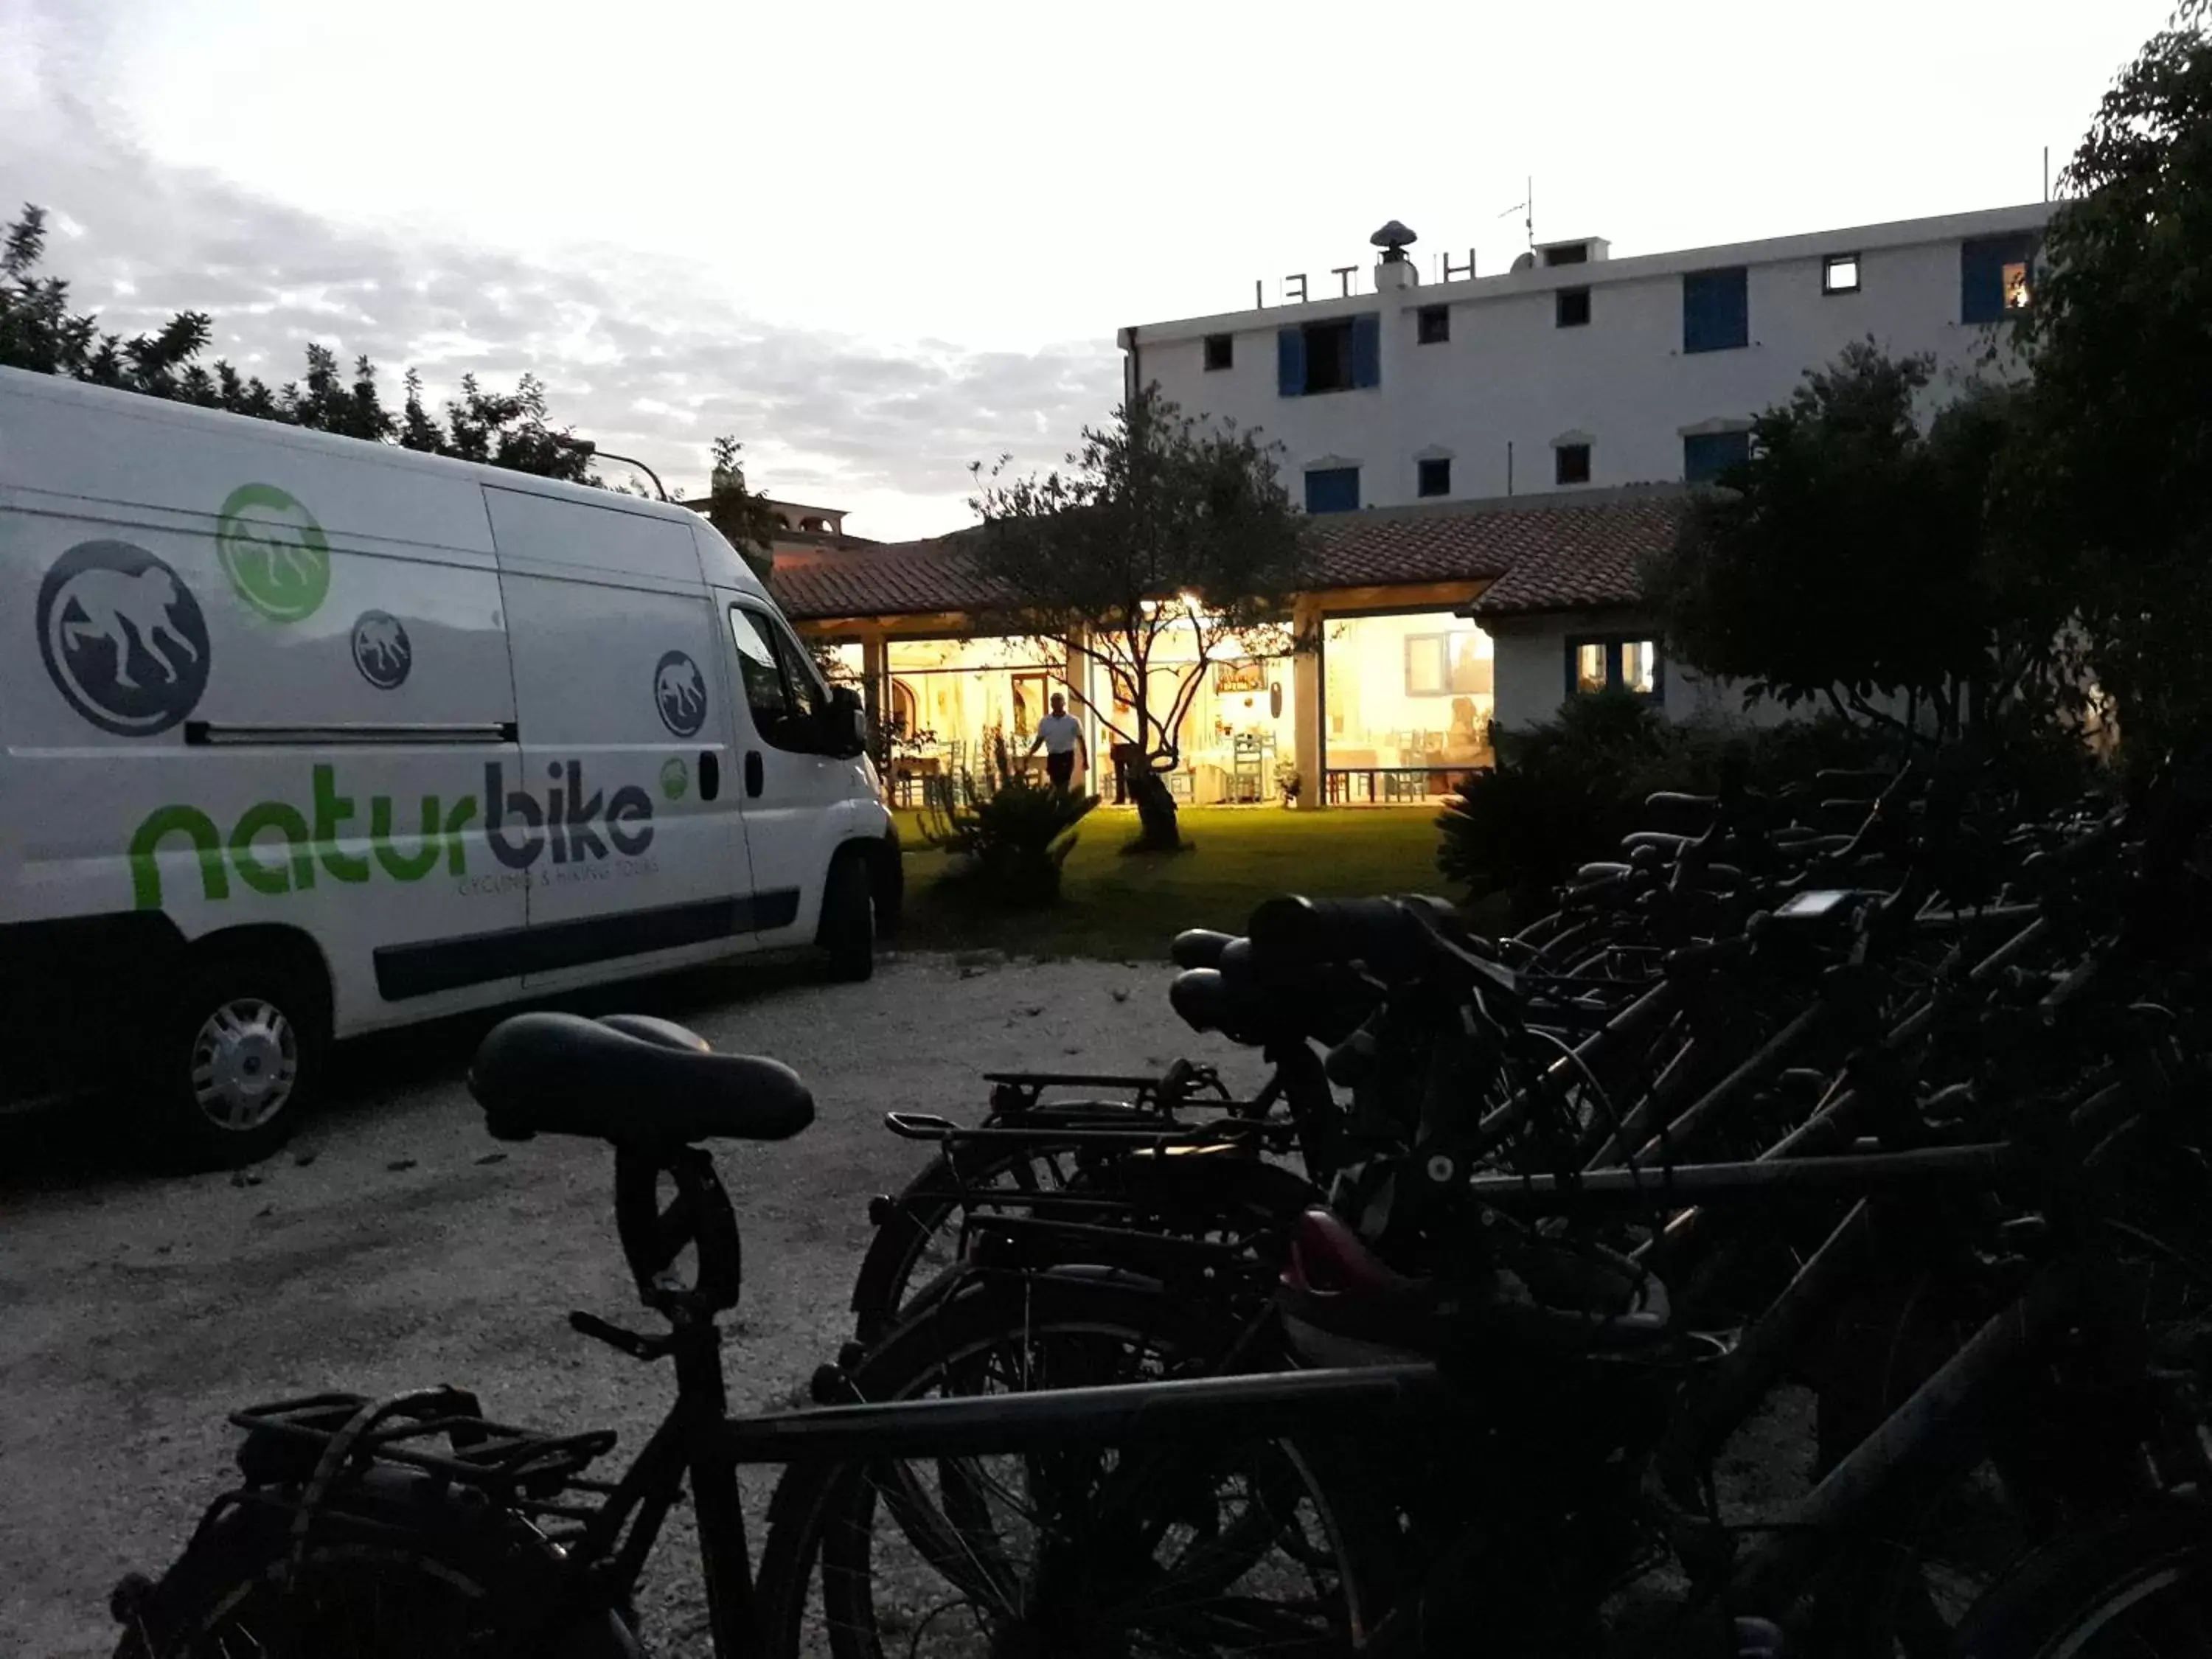 Cycling, Property Building in Hotel Ristorante S'Ortale